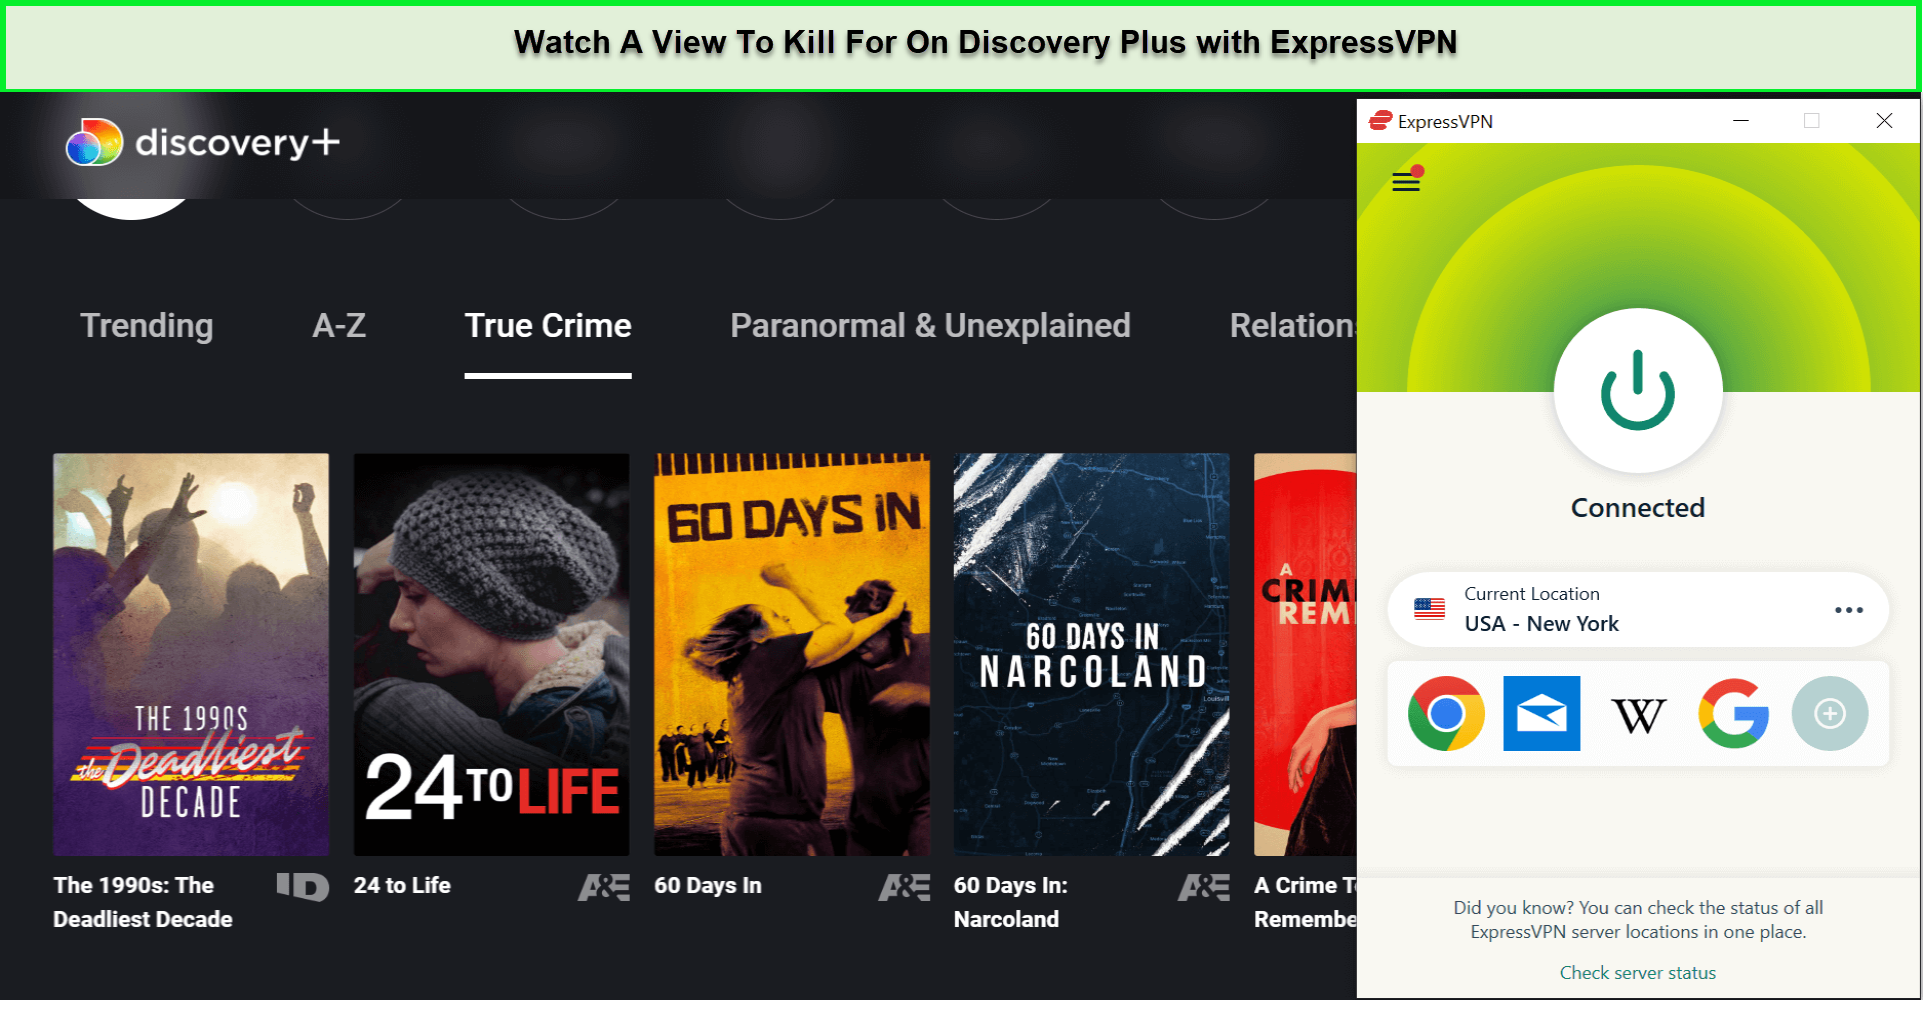 Watch-A-View-To-Kill-For-in-South Korea-On-Discovery-Plus-with-ExpressVPN